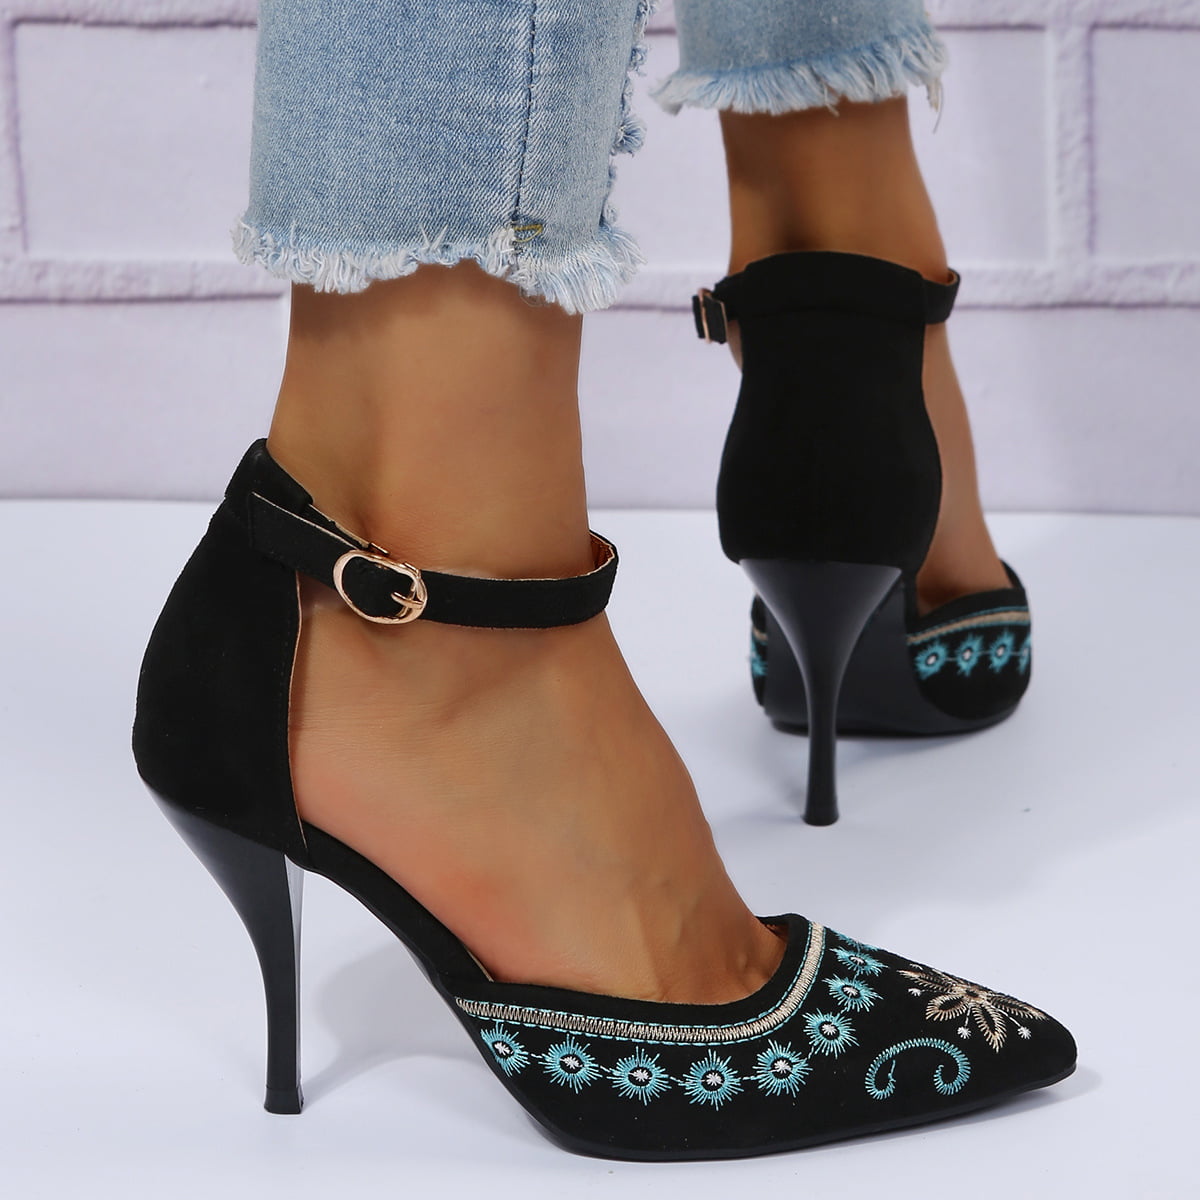 Women's Ankle Strap with Floral Embroidery Mid Heel Dress Pumps Wedding  Shoes Sandals Ankle Strap - Walmart.com